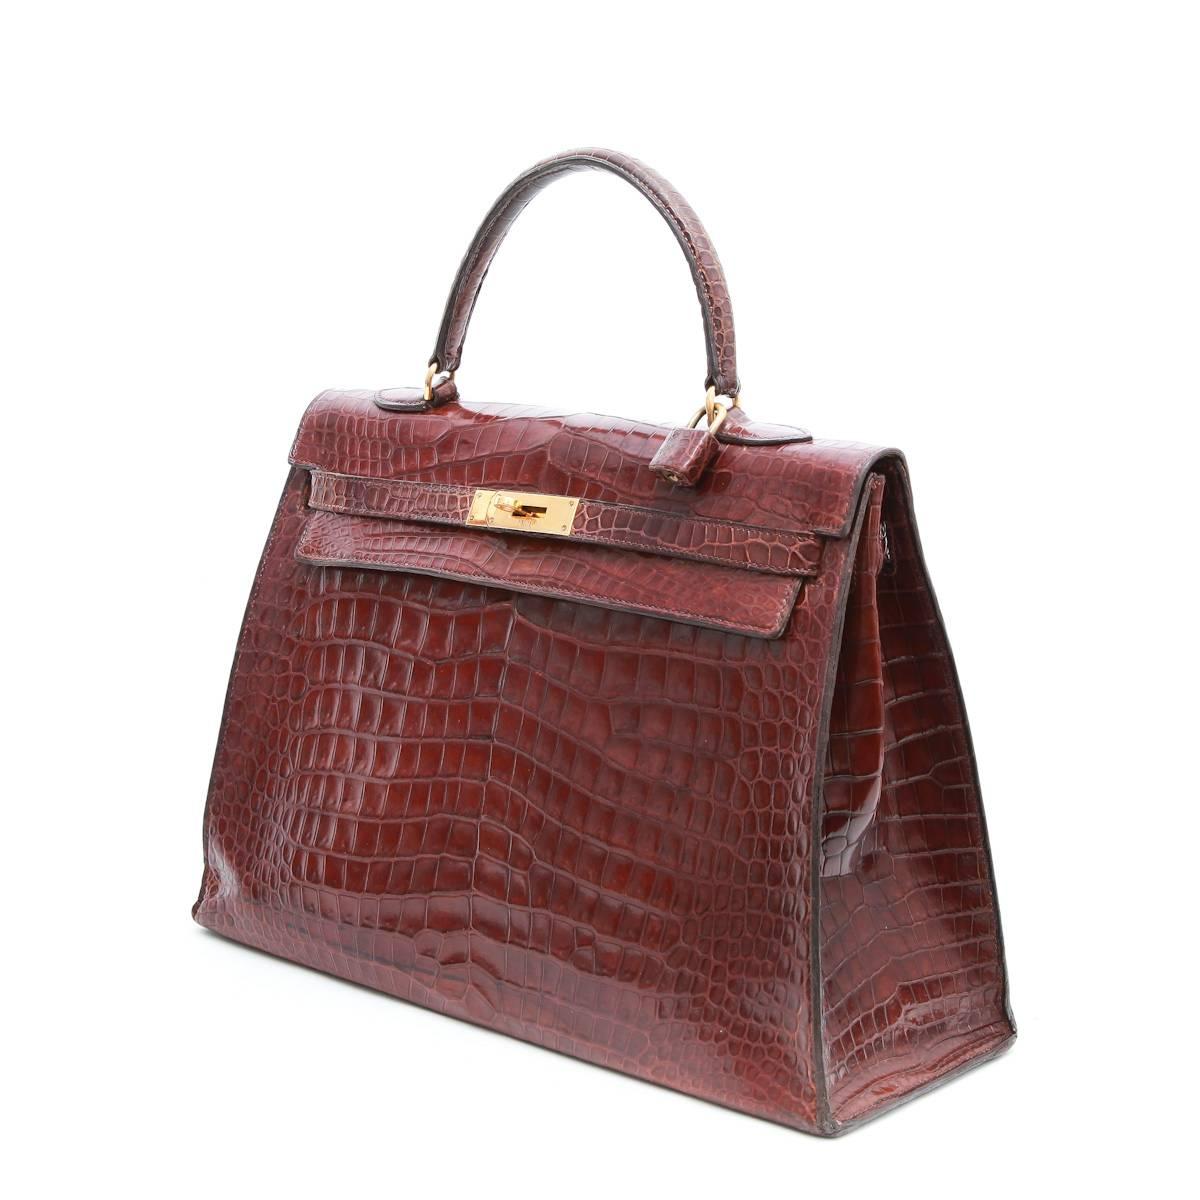 Hermes 'Kelly' 35 handbag in brown semi matt crocodile porosus with padlock. No zipper, keys or clochette. 

Stamp O (1959). Gold-plated hardware with micro scratches. The interior is in smooth brown leather with 3 pockets including a zipper.

Will